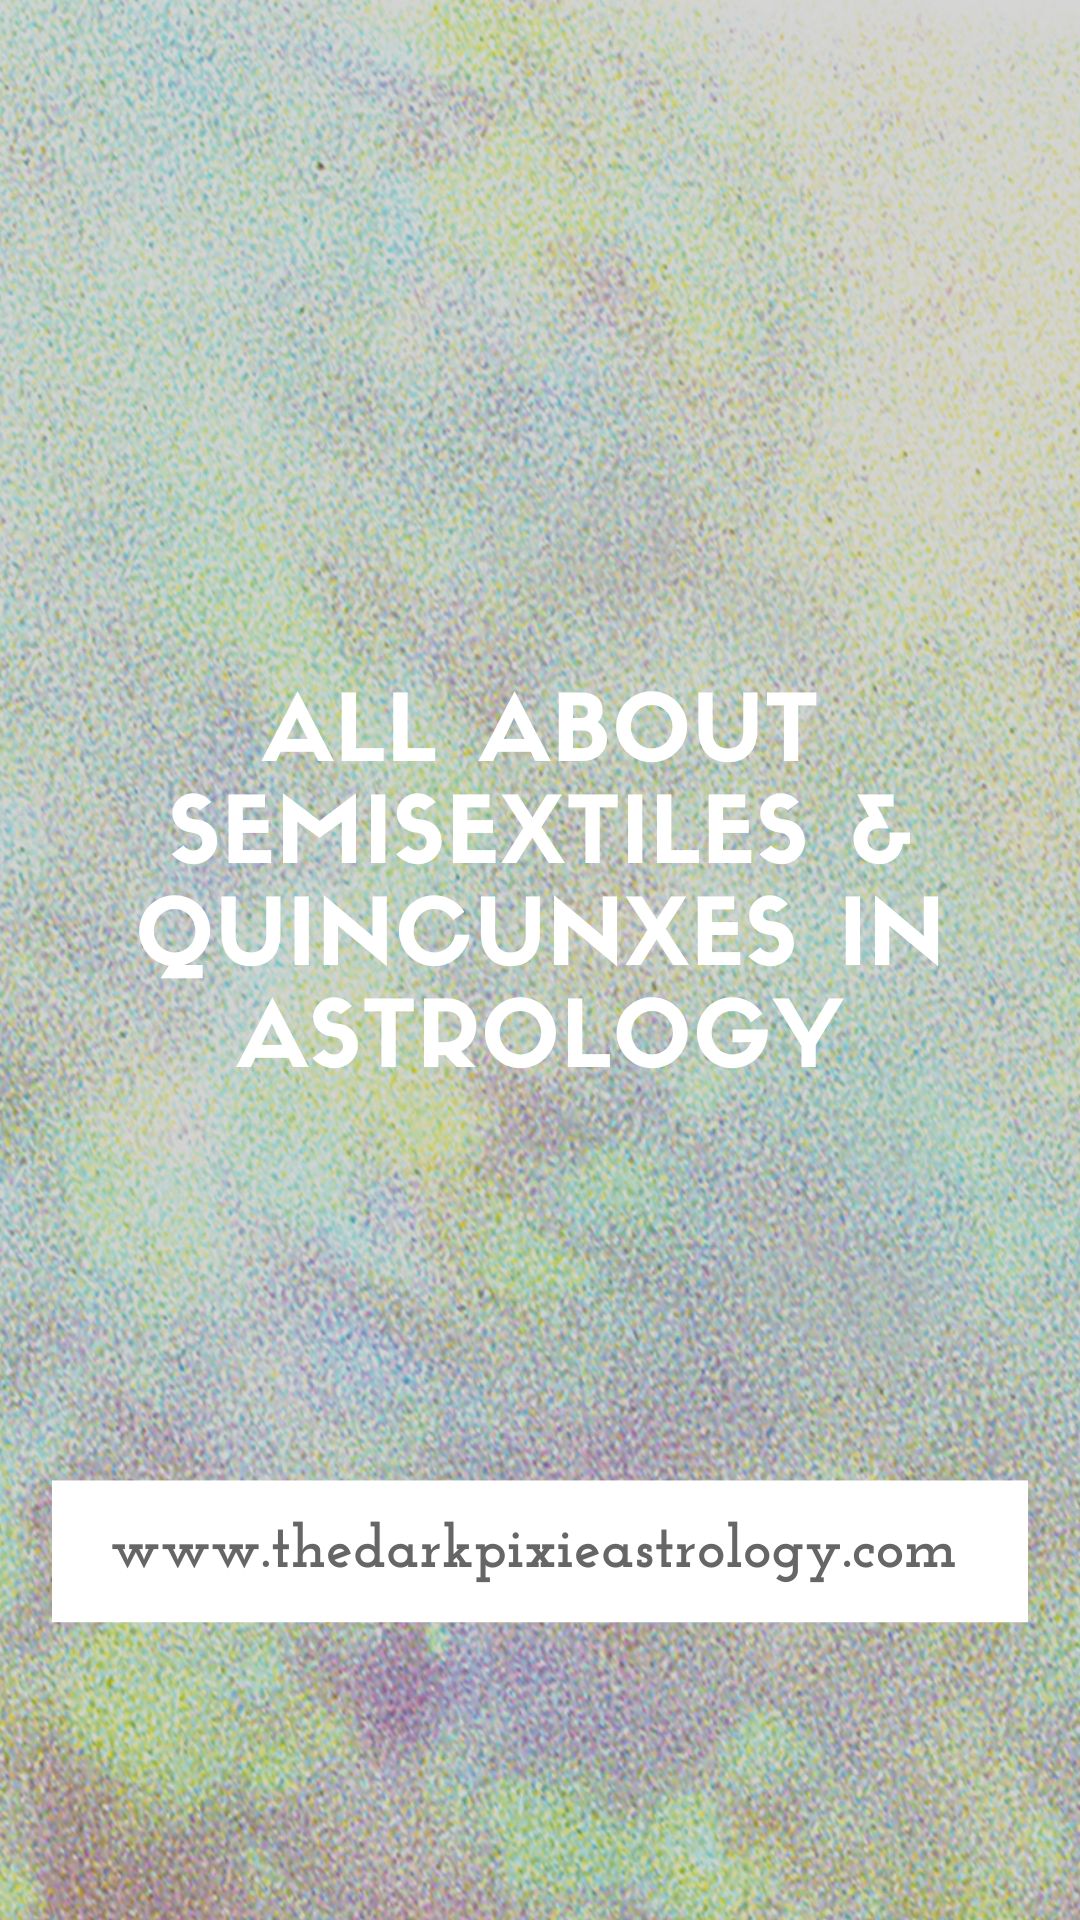 All About Semisextiles & Quincunxes in Astrology